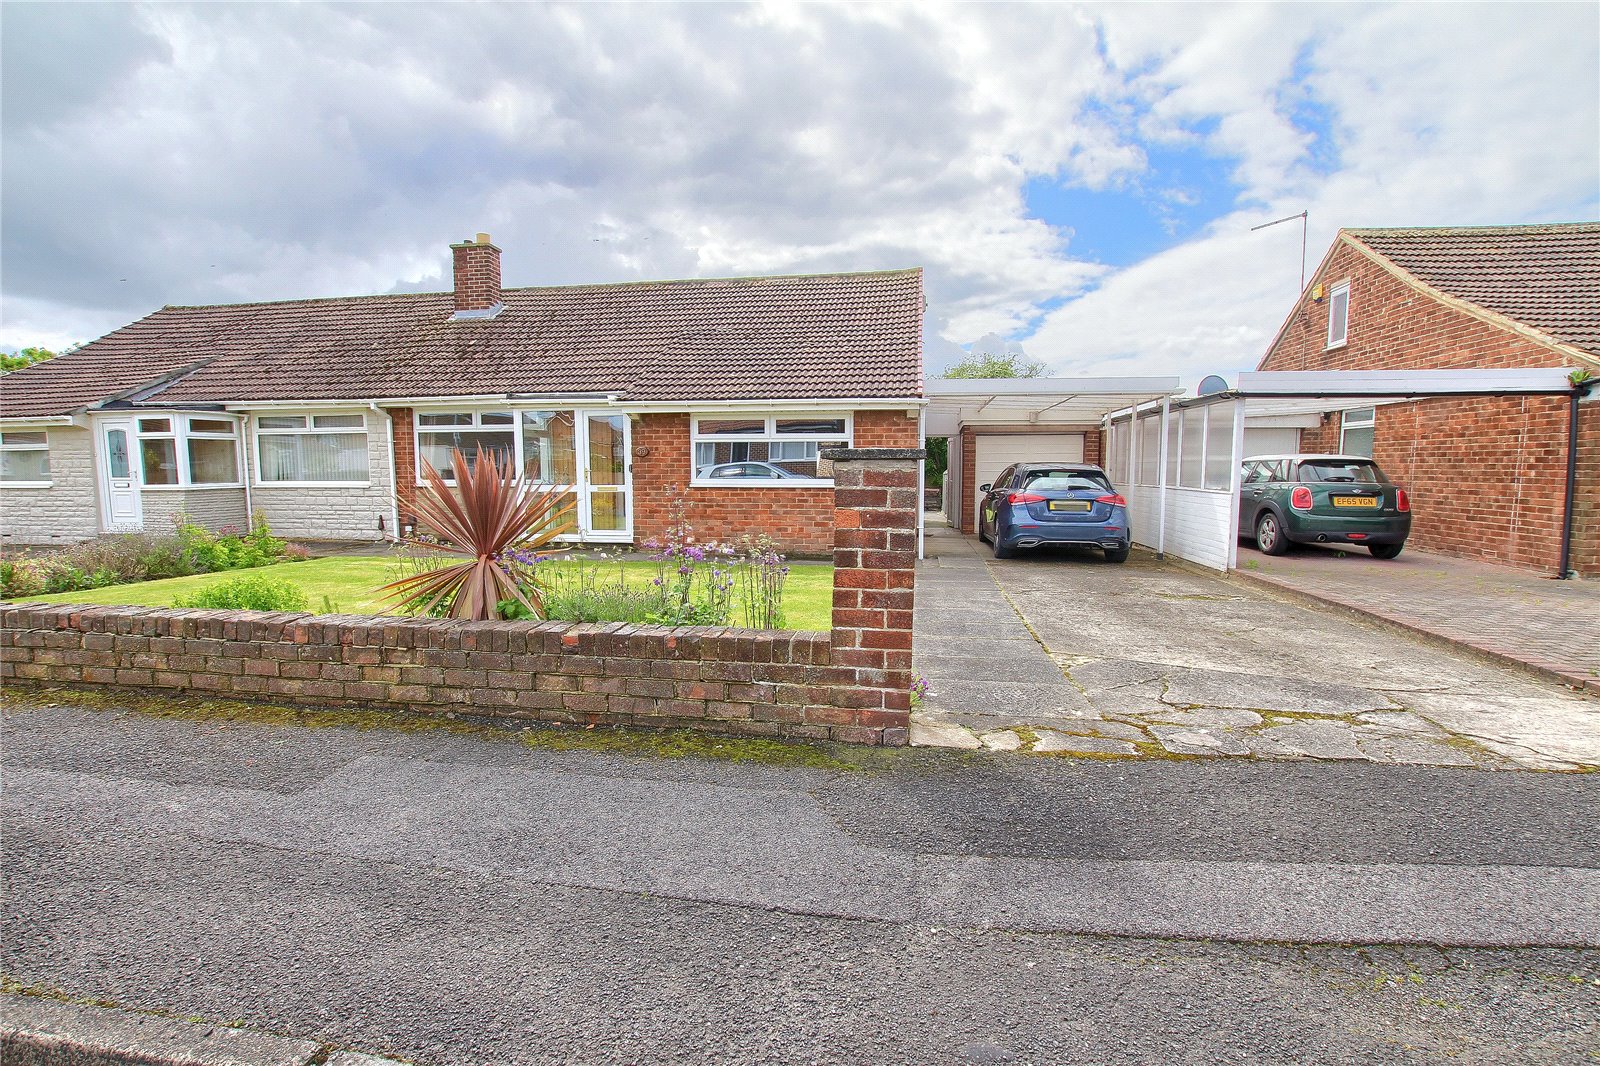 2 bed bungalow for sale in Annan Road, High Grange - Property Image 1